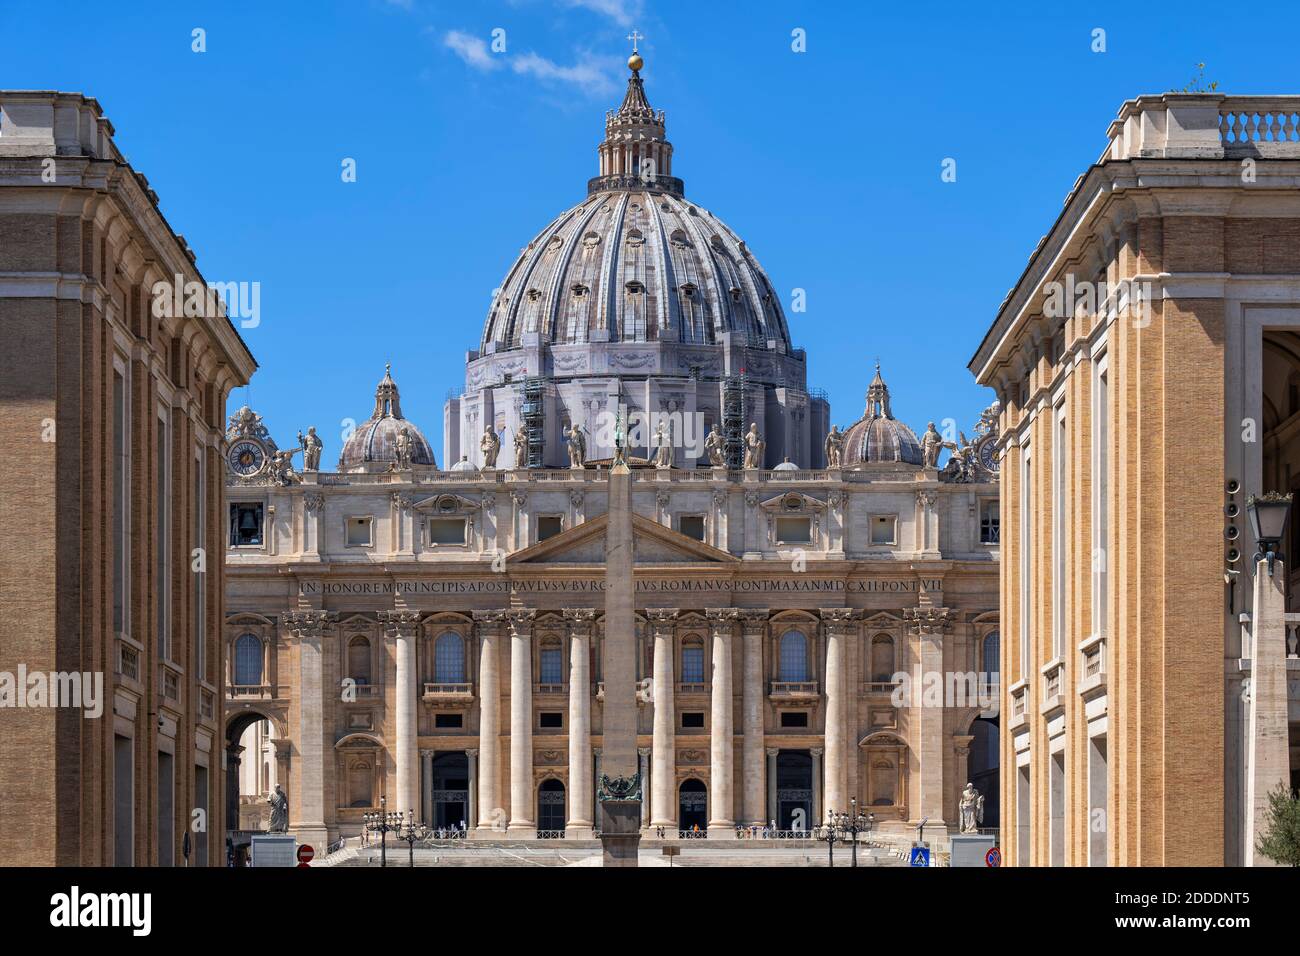 St. Peter's Basilica in city against blue sky on sunny day Stock Photo